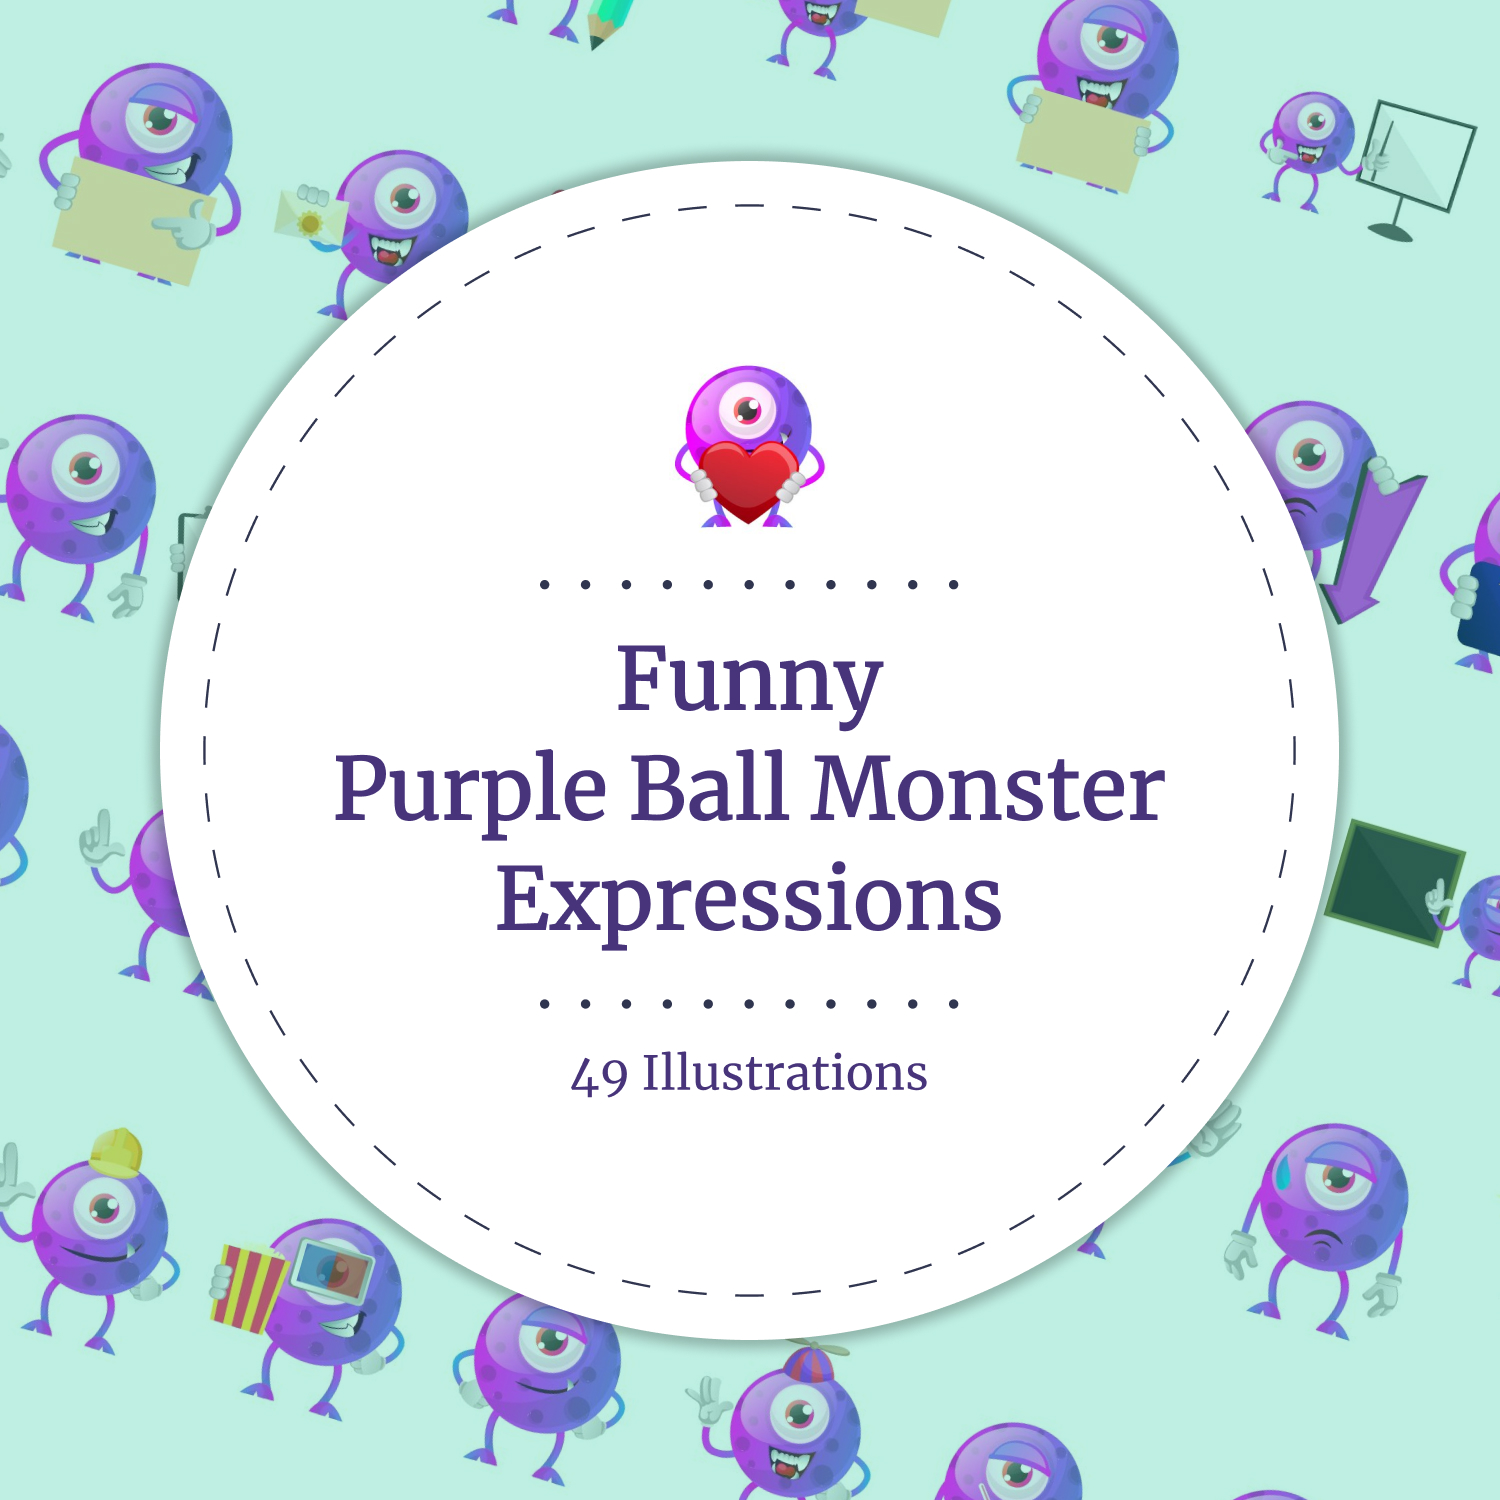 49X Funny Purple Ball Monster Expressions Illustrations.